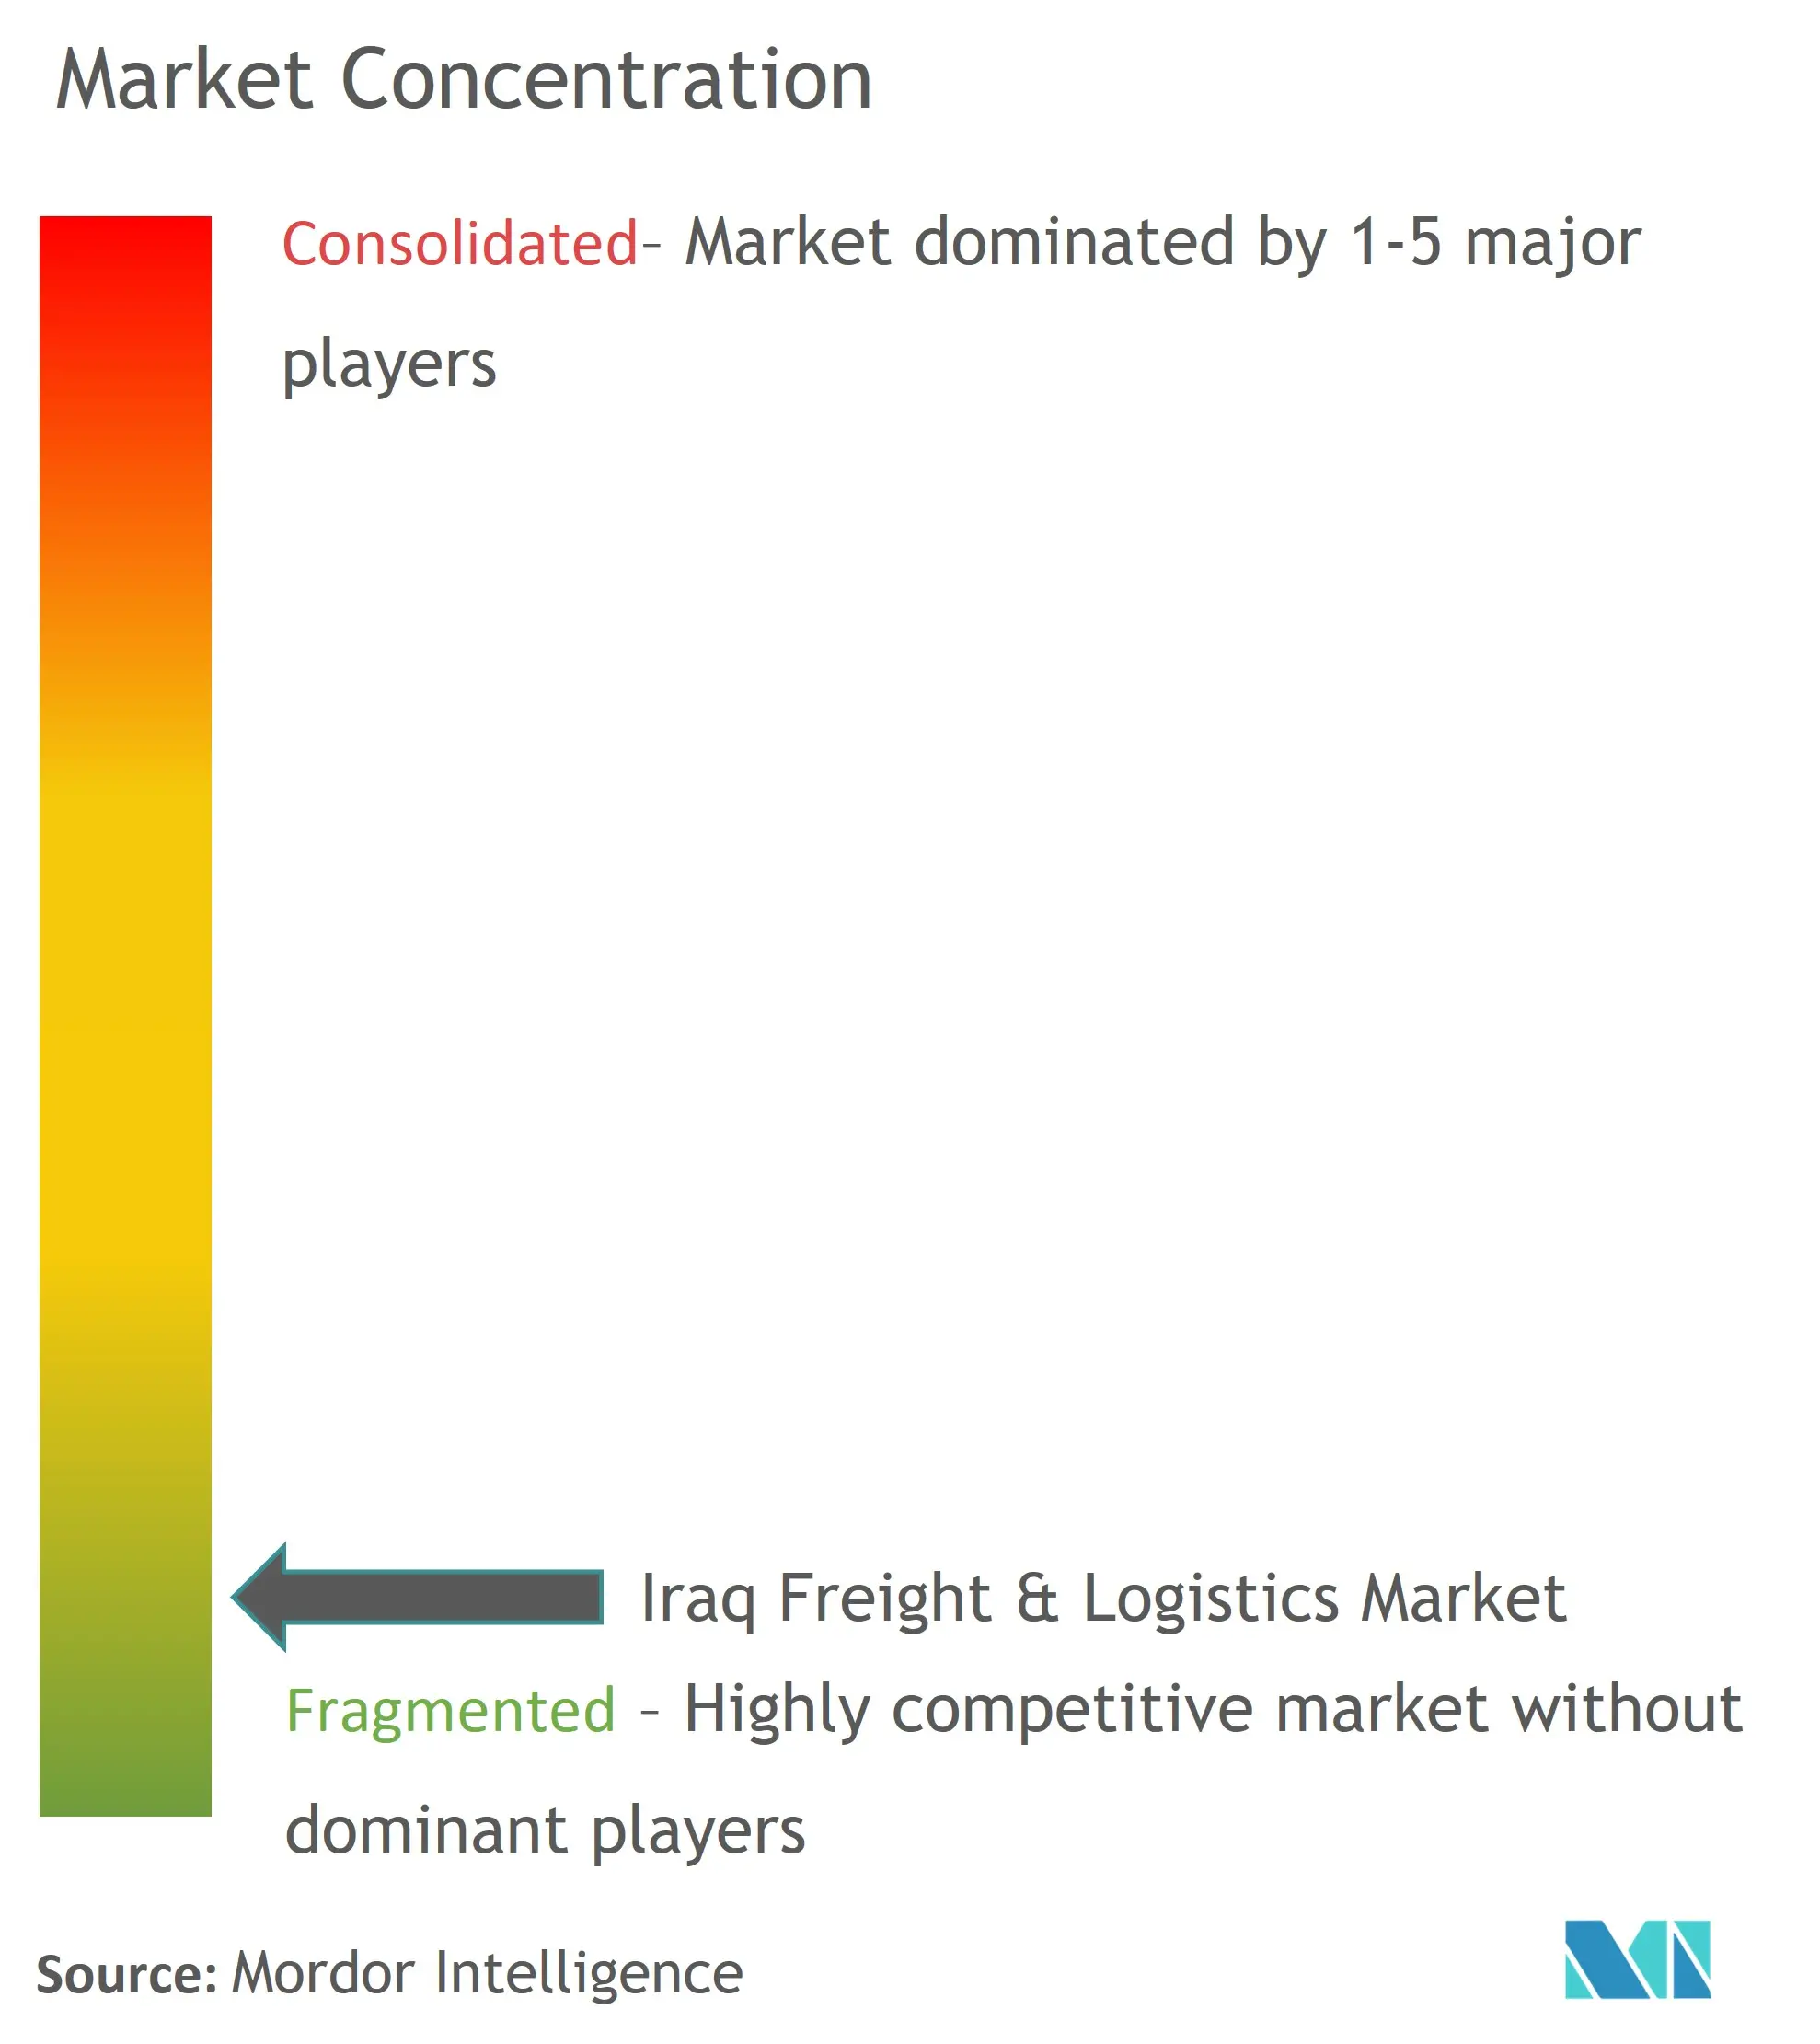 Iraq Freight and Logistics Market Concentration